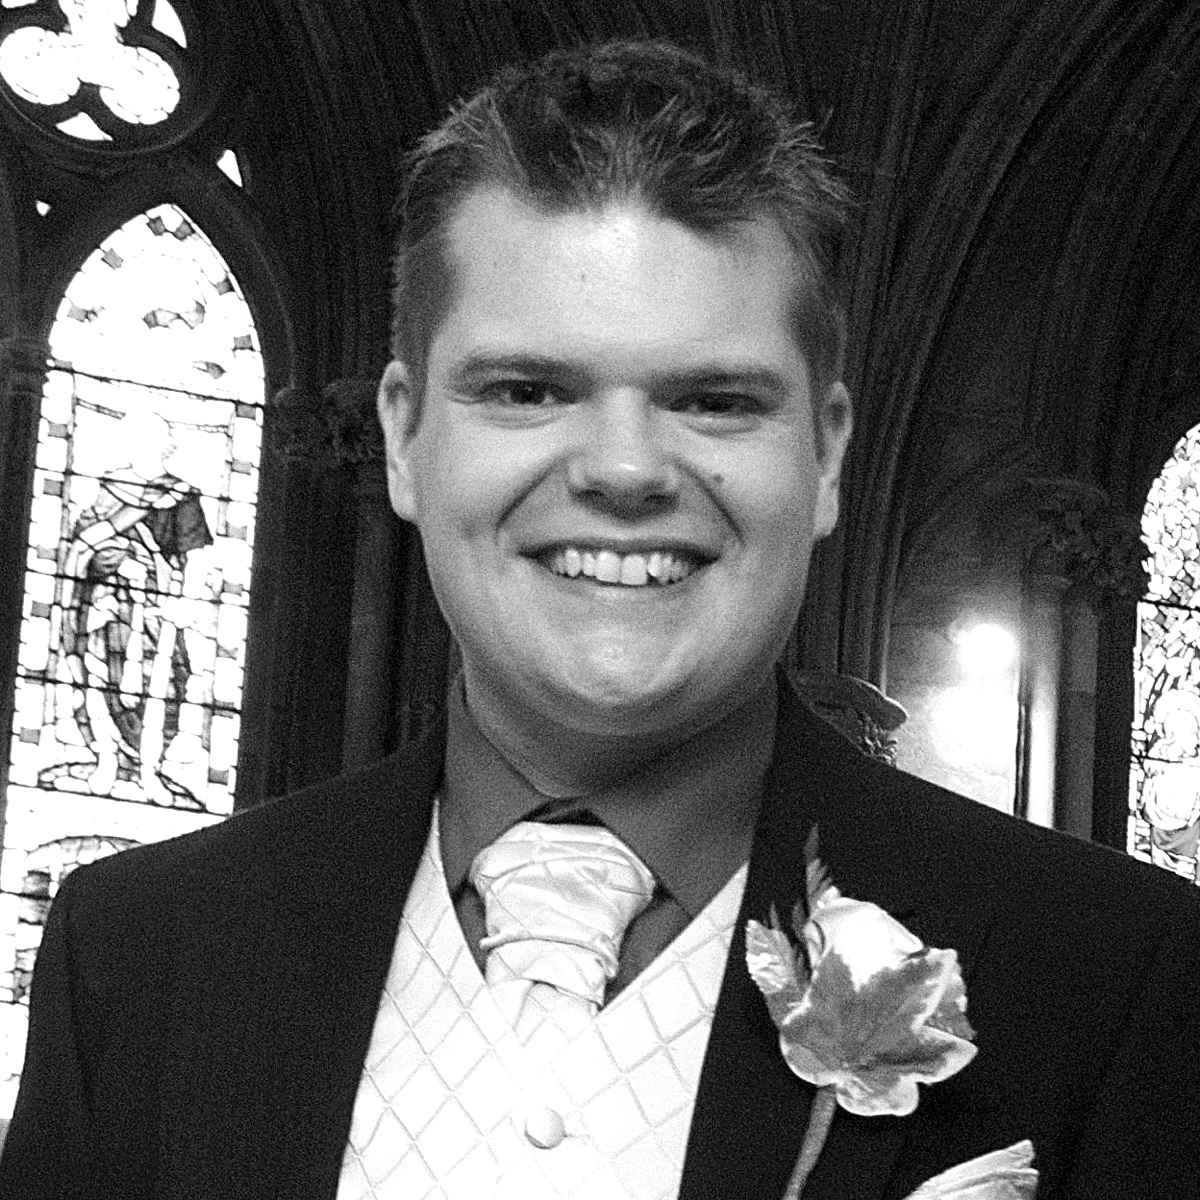 James at his wedding in 2009